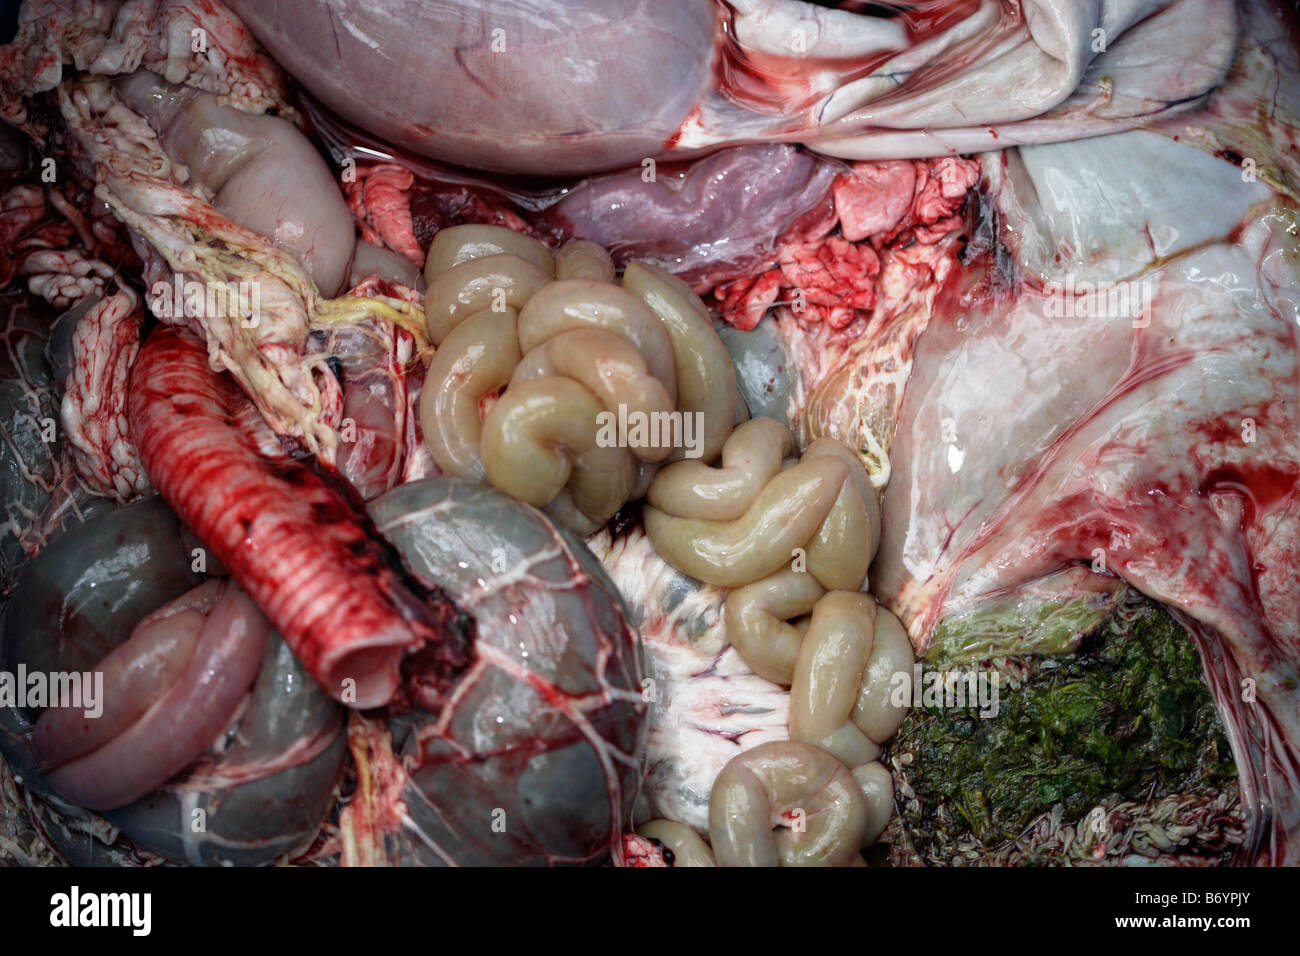 Intestines and internal organs of a deer Stock Photo